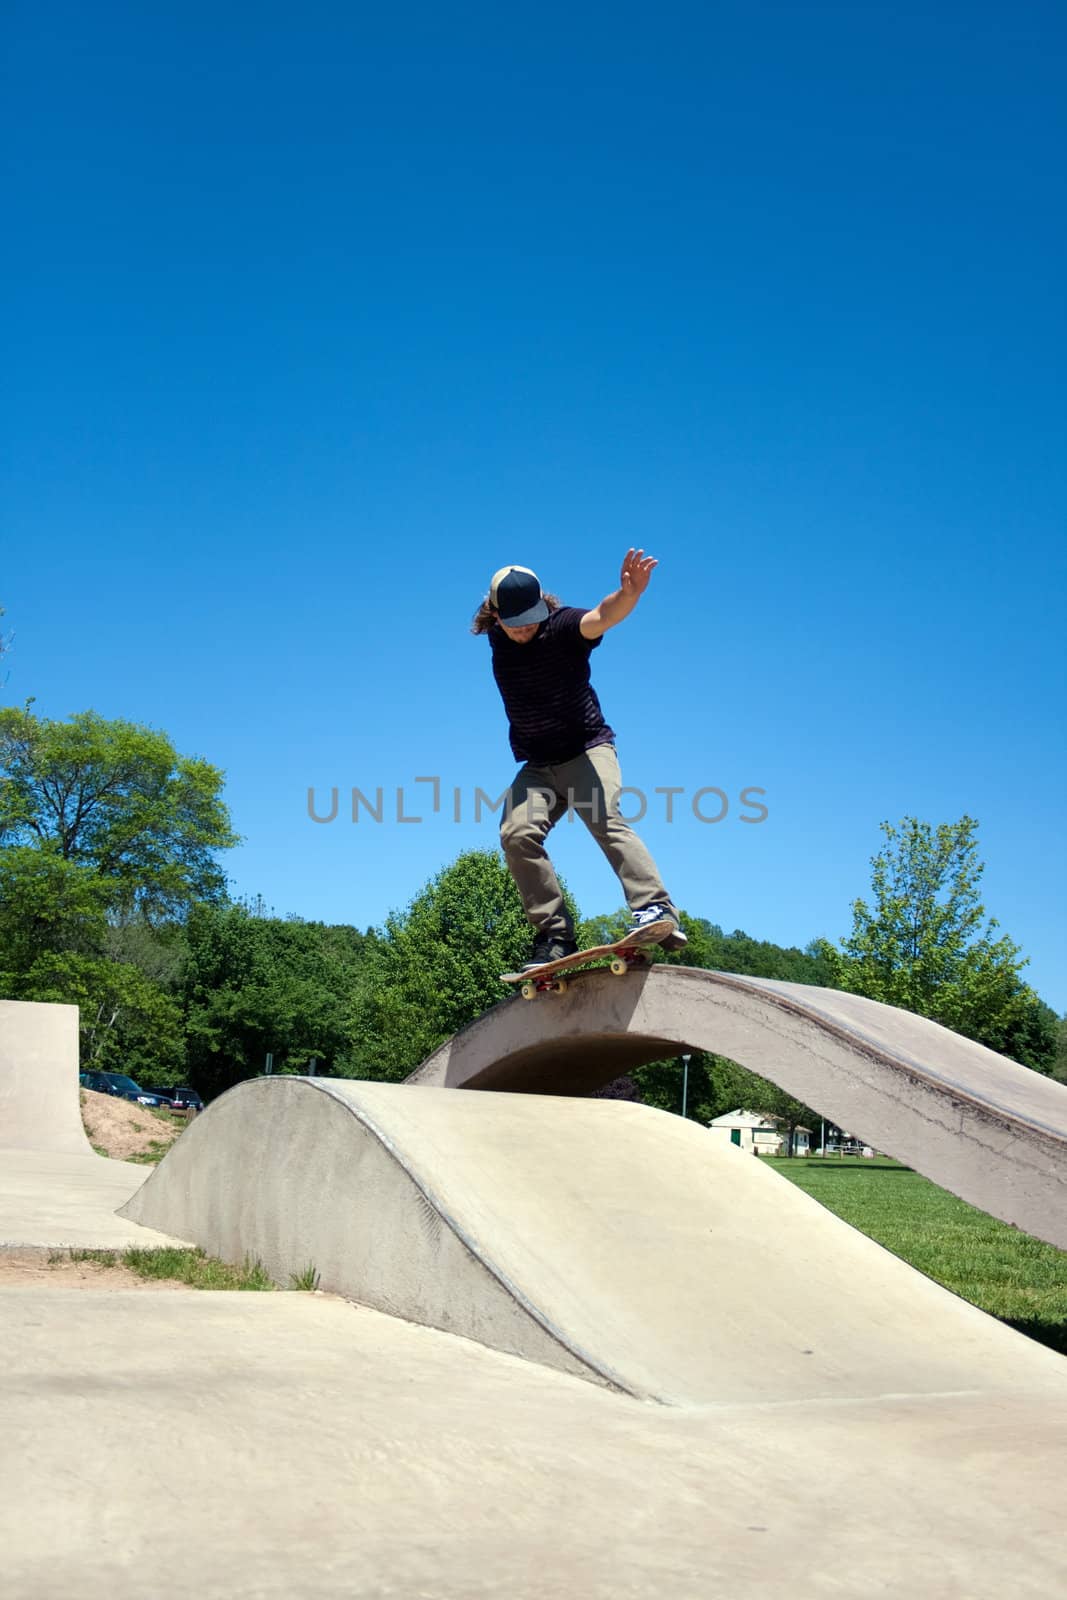 Action shot of a skateboarder performing a grind at a concrete skate park.